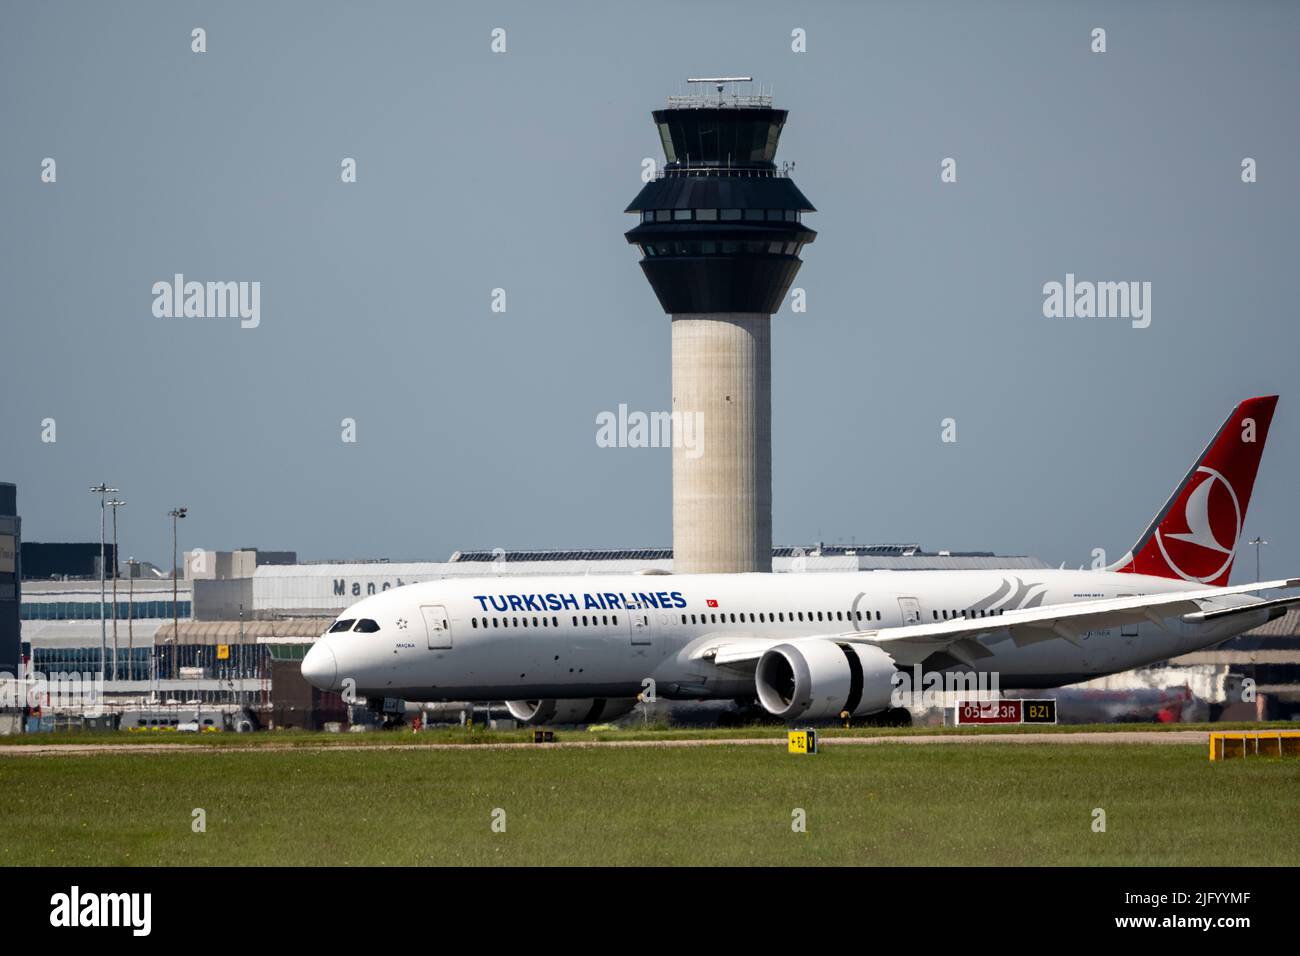 Turkish Airlines Boeing 787 Dreamliner landing at Manchester Airport, Manchester, England, United Kingdom, Europe Stock Photo